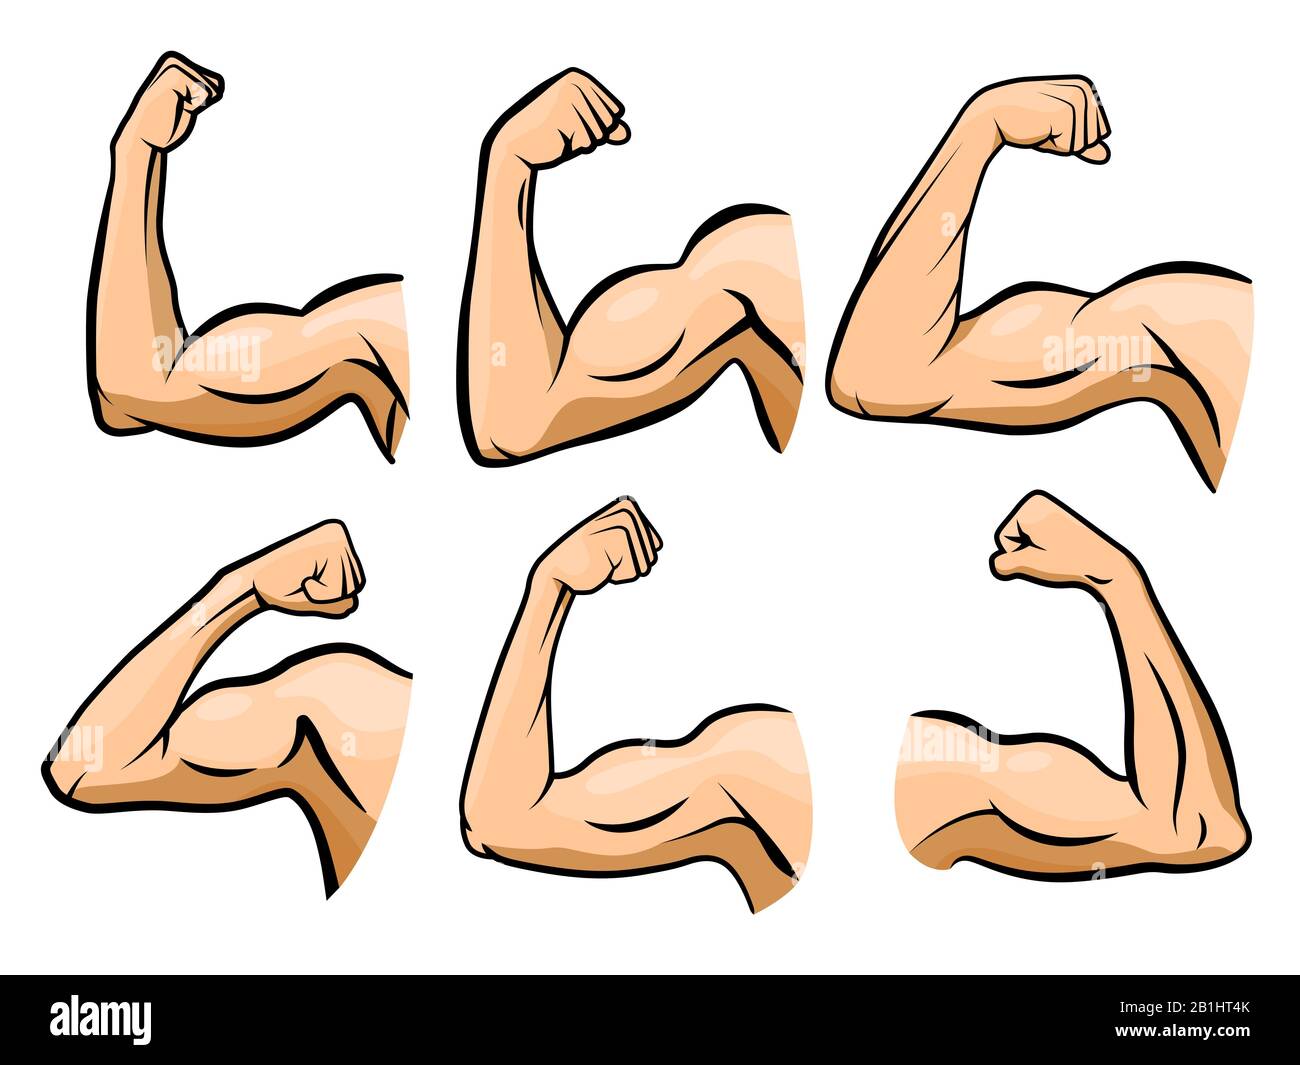 Strong arm, boxer arms muscles and strength hands hard gym vector illustrat...